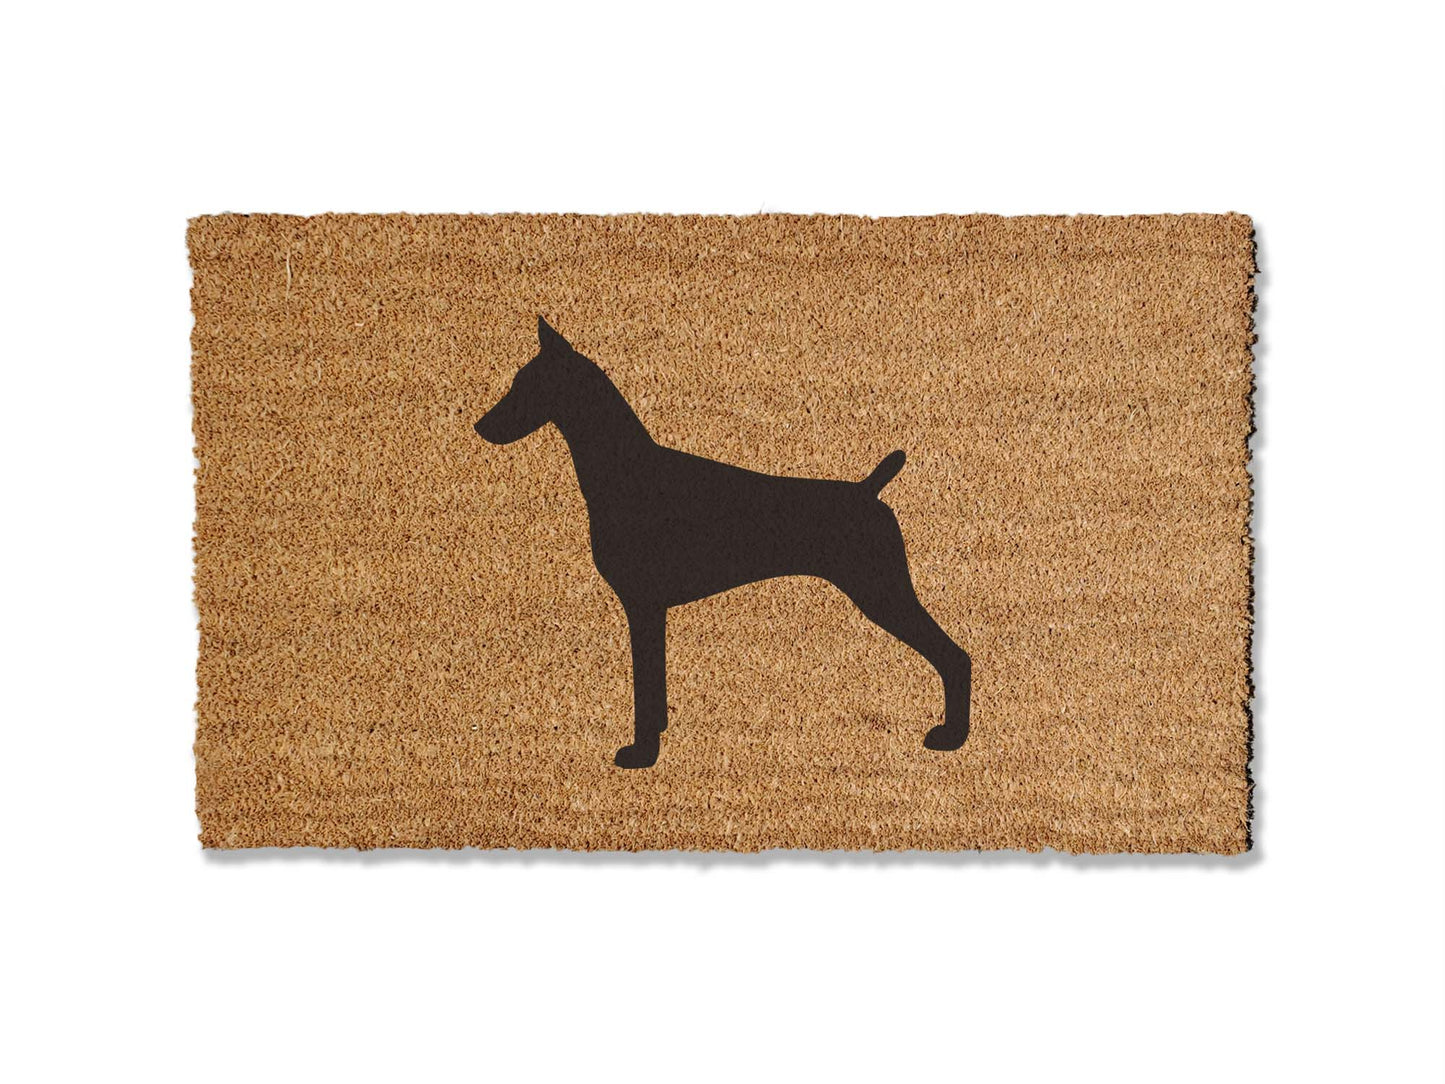 Elevate your entryway with our charming coir welcome doormat featuring an adorable Doberman Pinscher Dog design. Available in multiple sizes, it's the perfect gift for dog lovers, adding a delightful touch to your home's first impression.